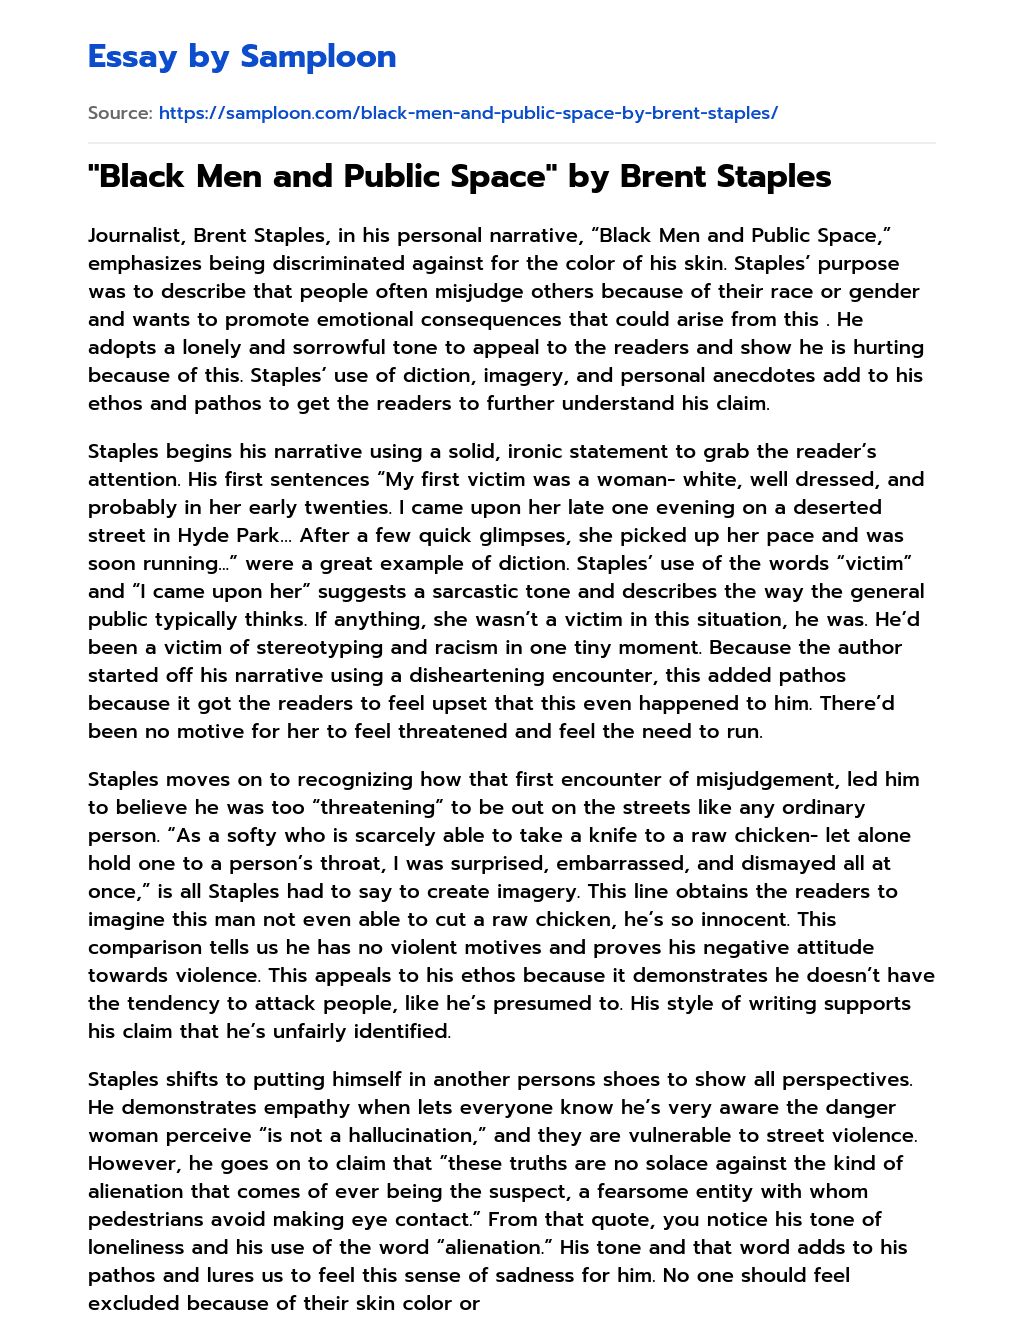 “Black Men and Public Space” by Brent Staples essay